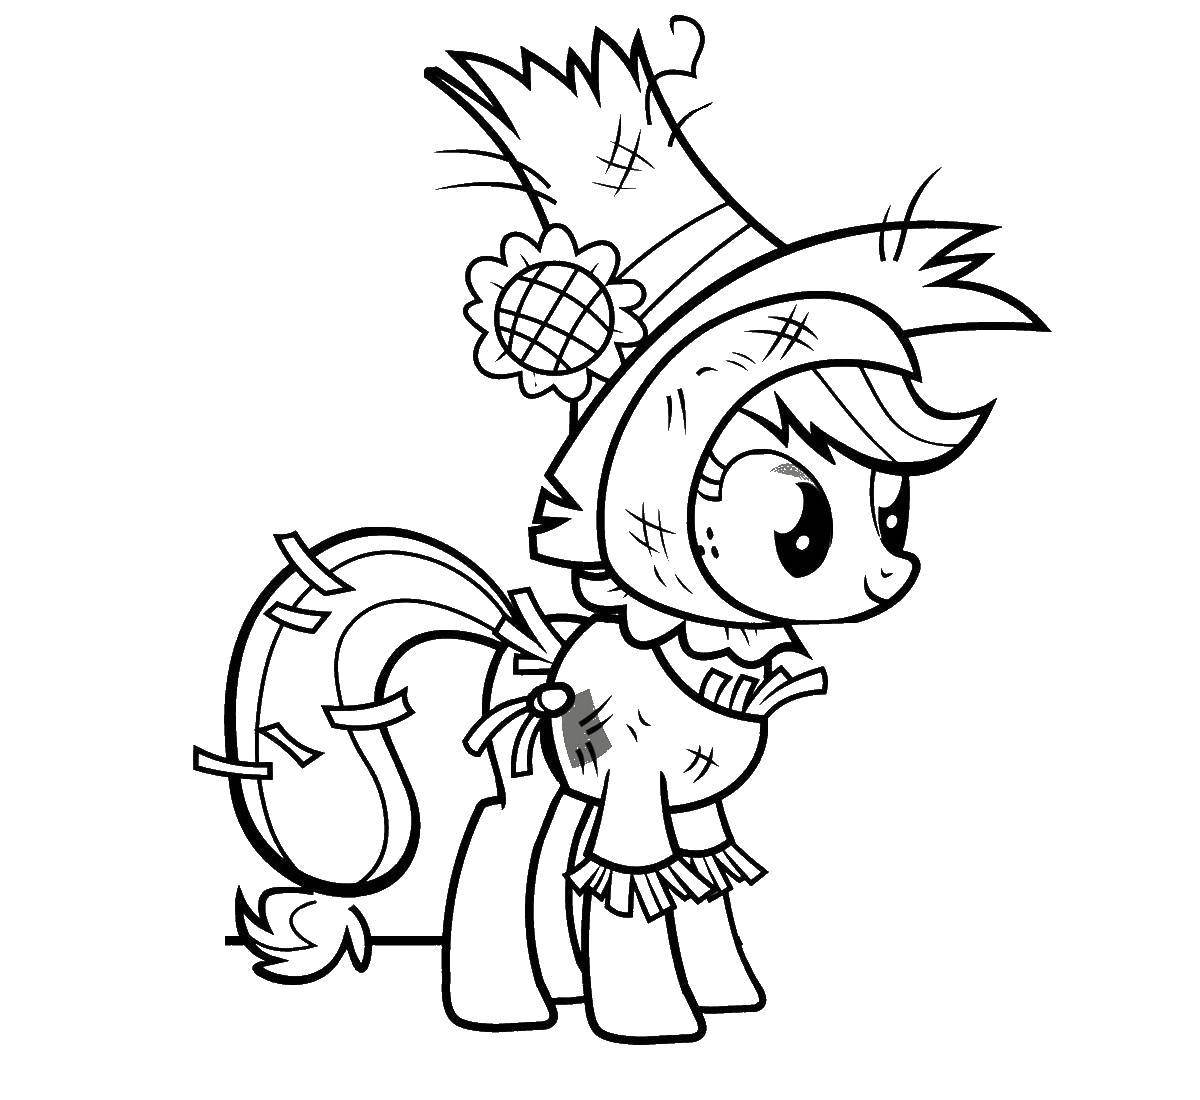 Coloring Pony in the costume of a Scarecrow. Category Ponies. Tags:  Pony, My little pony.